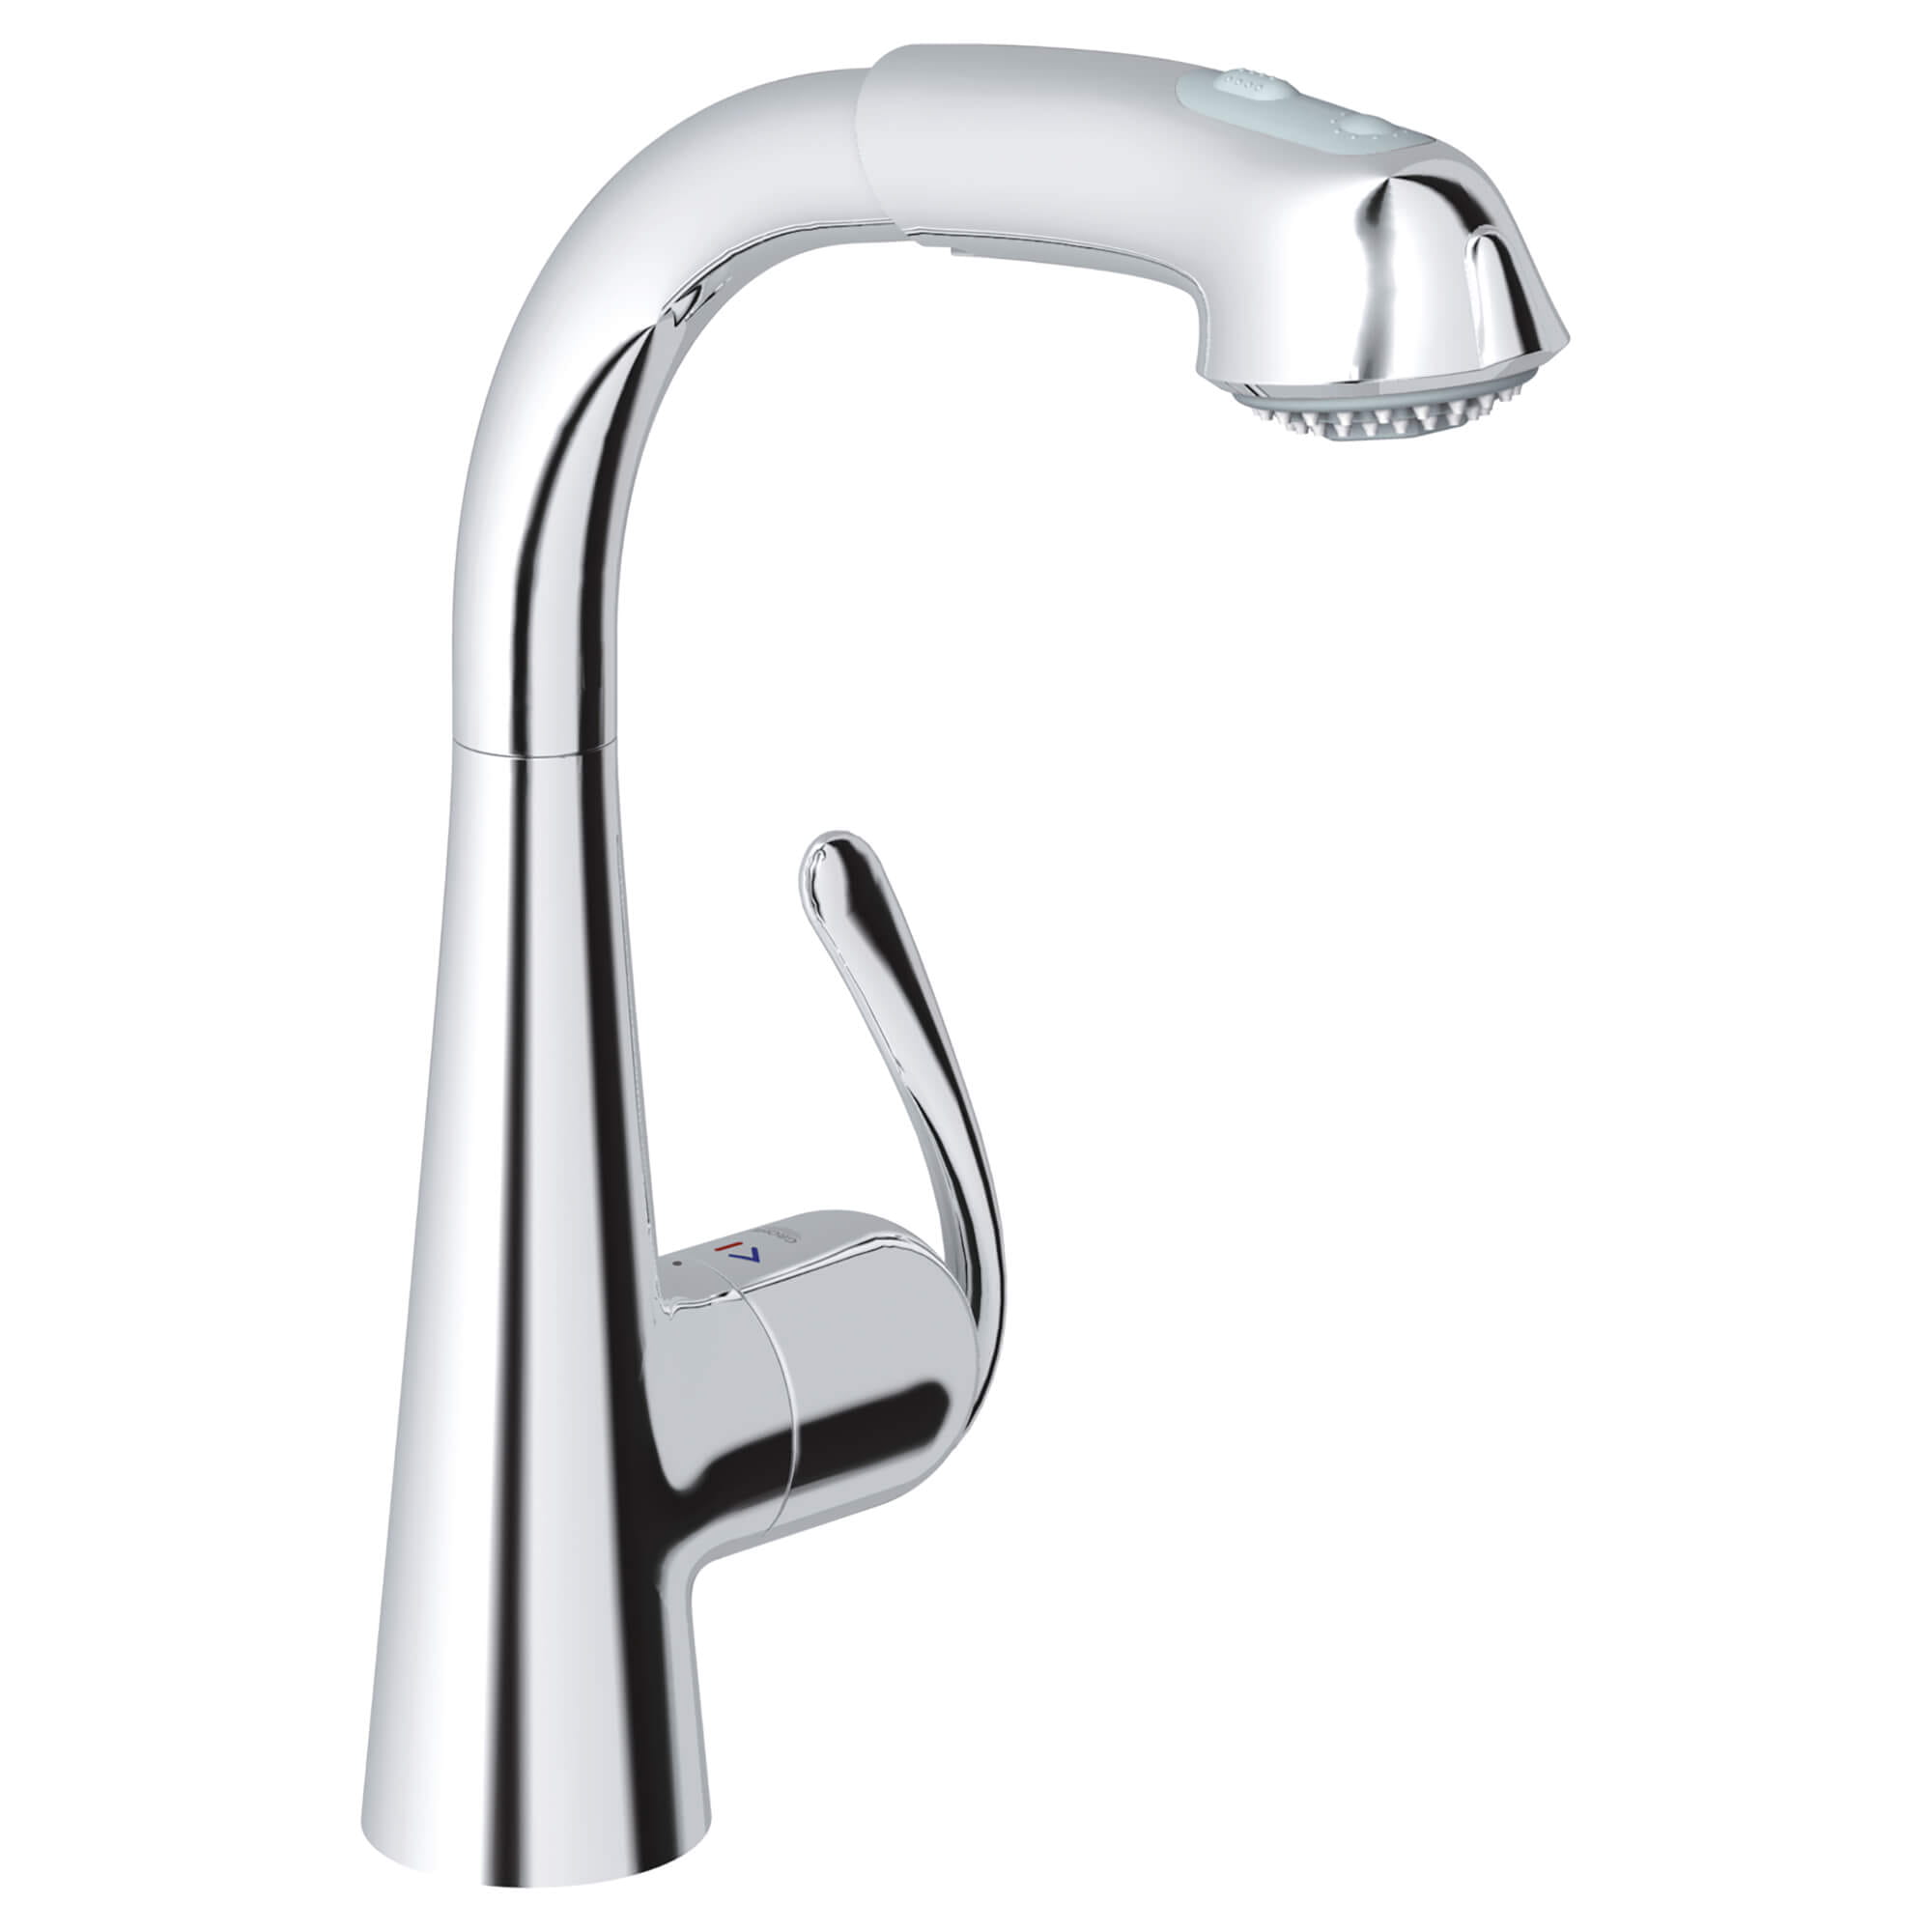 Ladylux Dual Spray Pull Out Kitchen Faucet